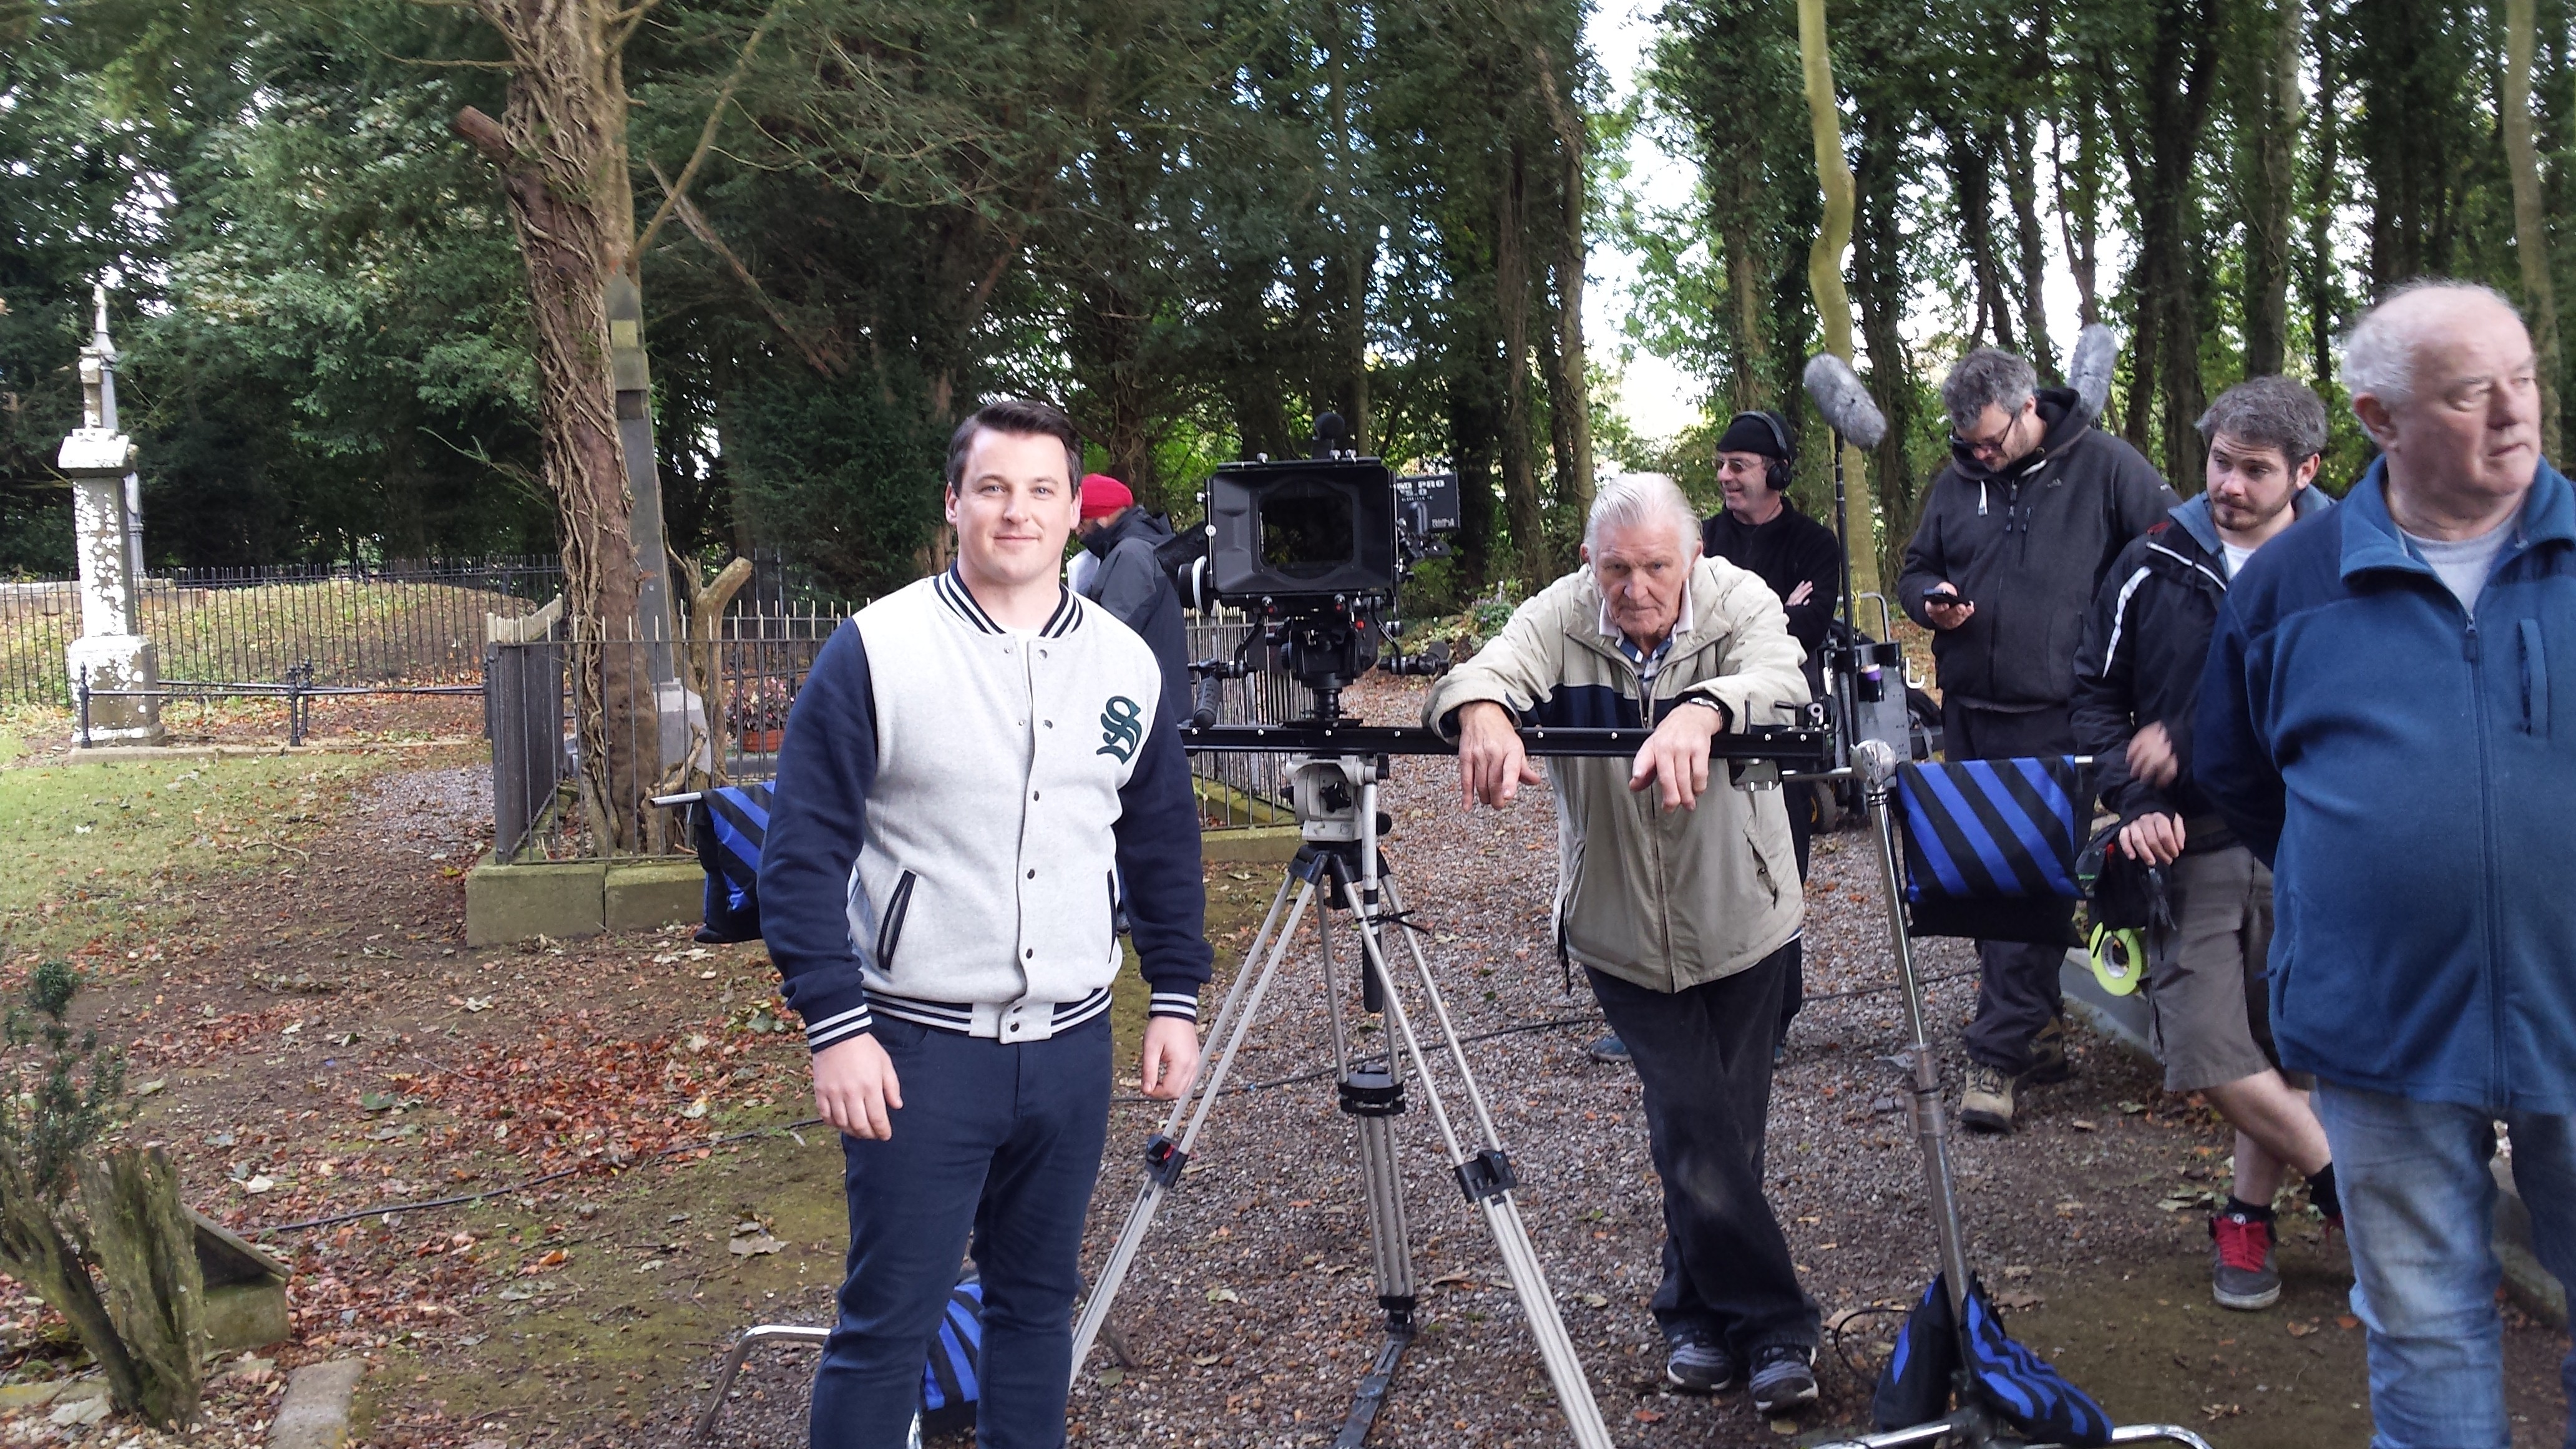 Declan Reynolds and Jack Conroy (Director / DOP) on the set of THE GAELIC COURSE in Newbridge, Co Kildare.